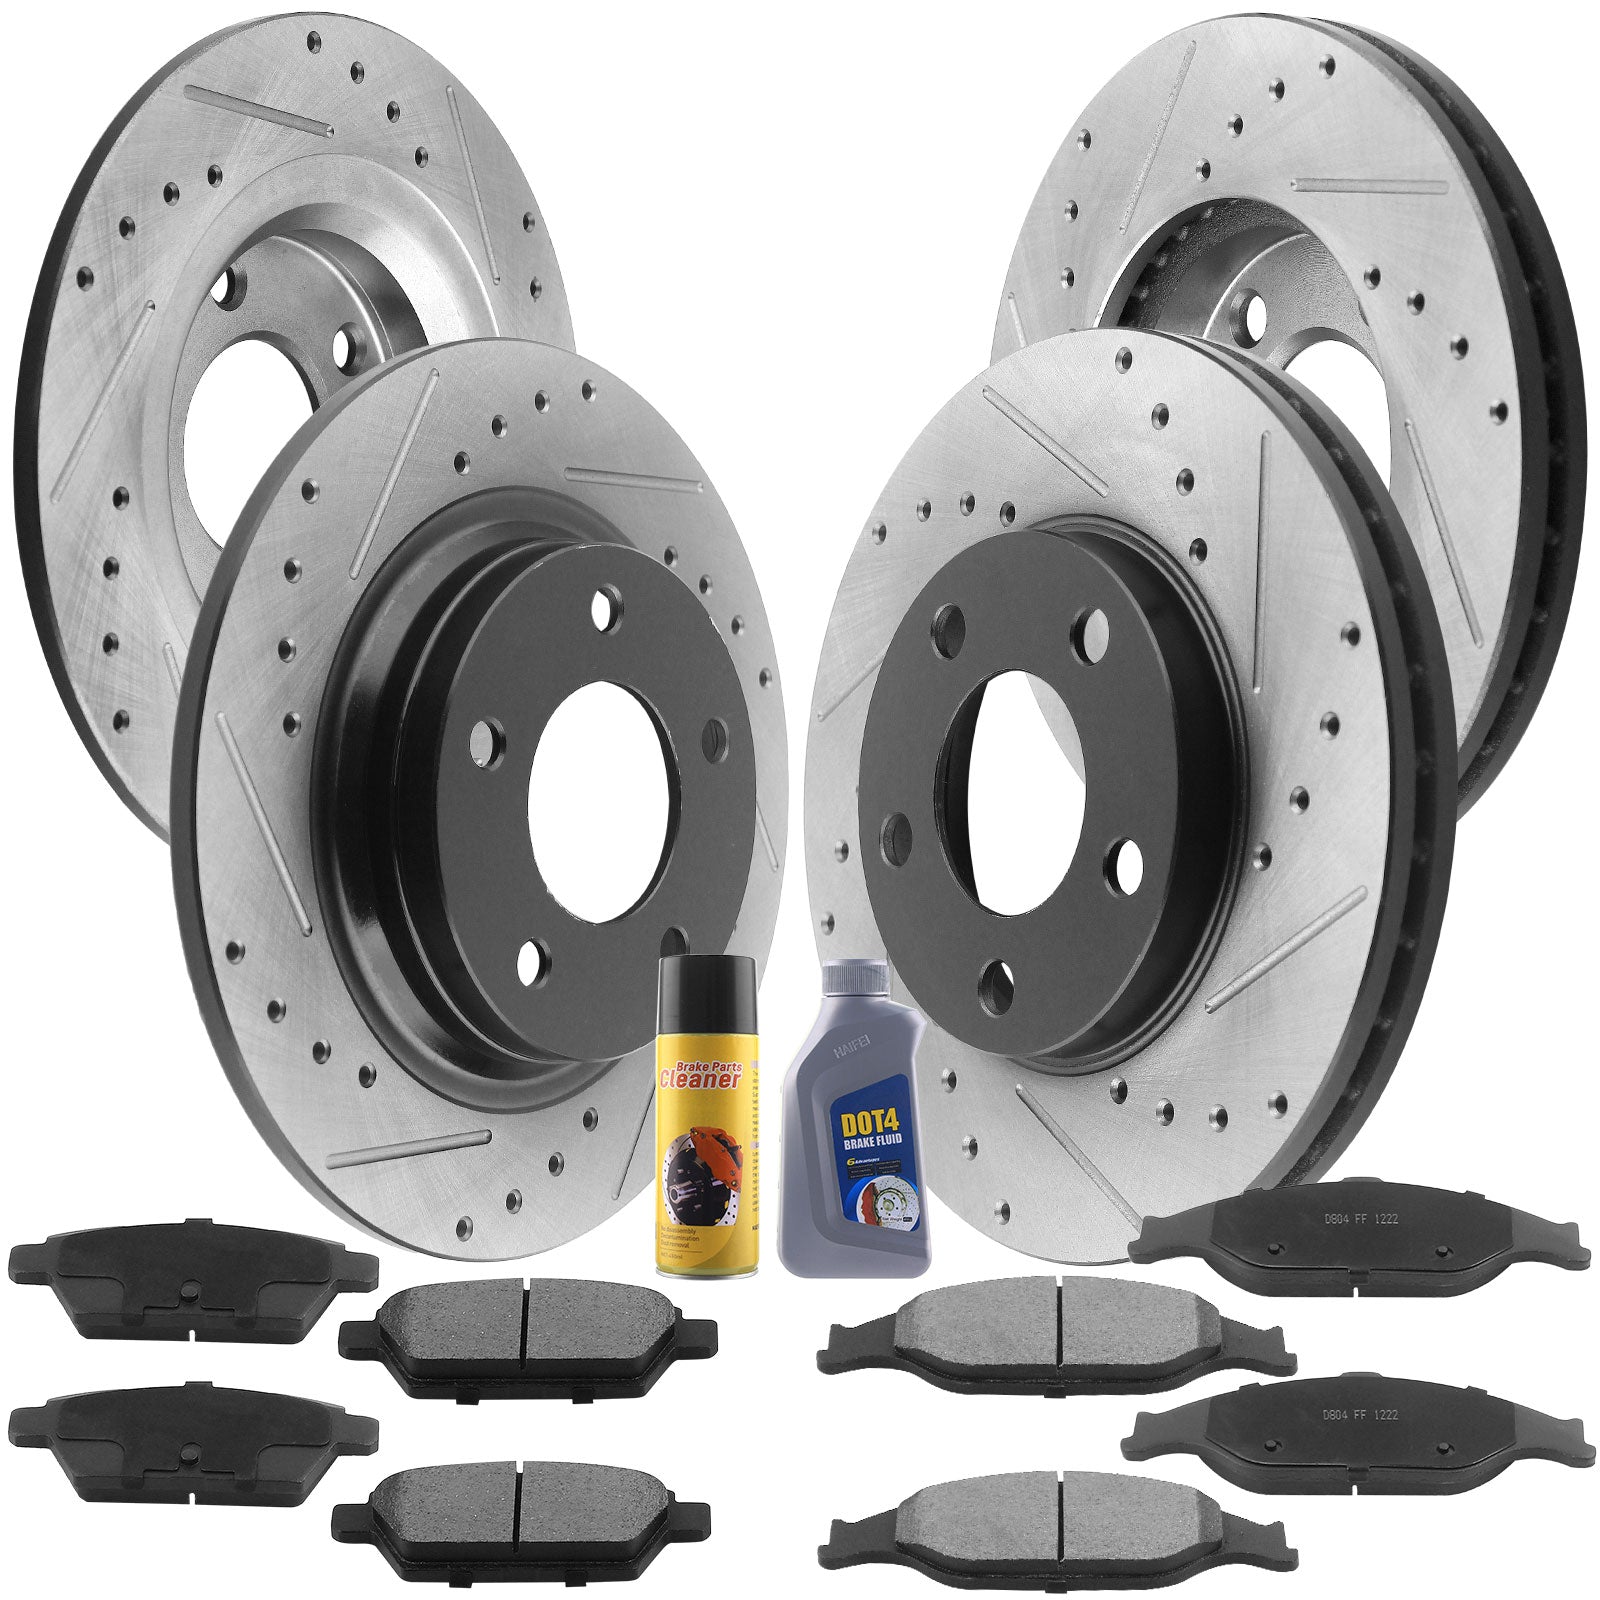 Front Rear Drilled & Slotted Brake Rotors + Ceramic Brake Pads + Cleaner & Fluid Fit for 1999 2000 2001 2002 2003 2004 Ford Mustang, 5 Lugs(Bolts Not Included)-54011 54017 MotorbyMotor